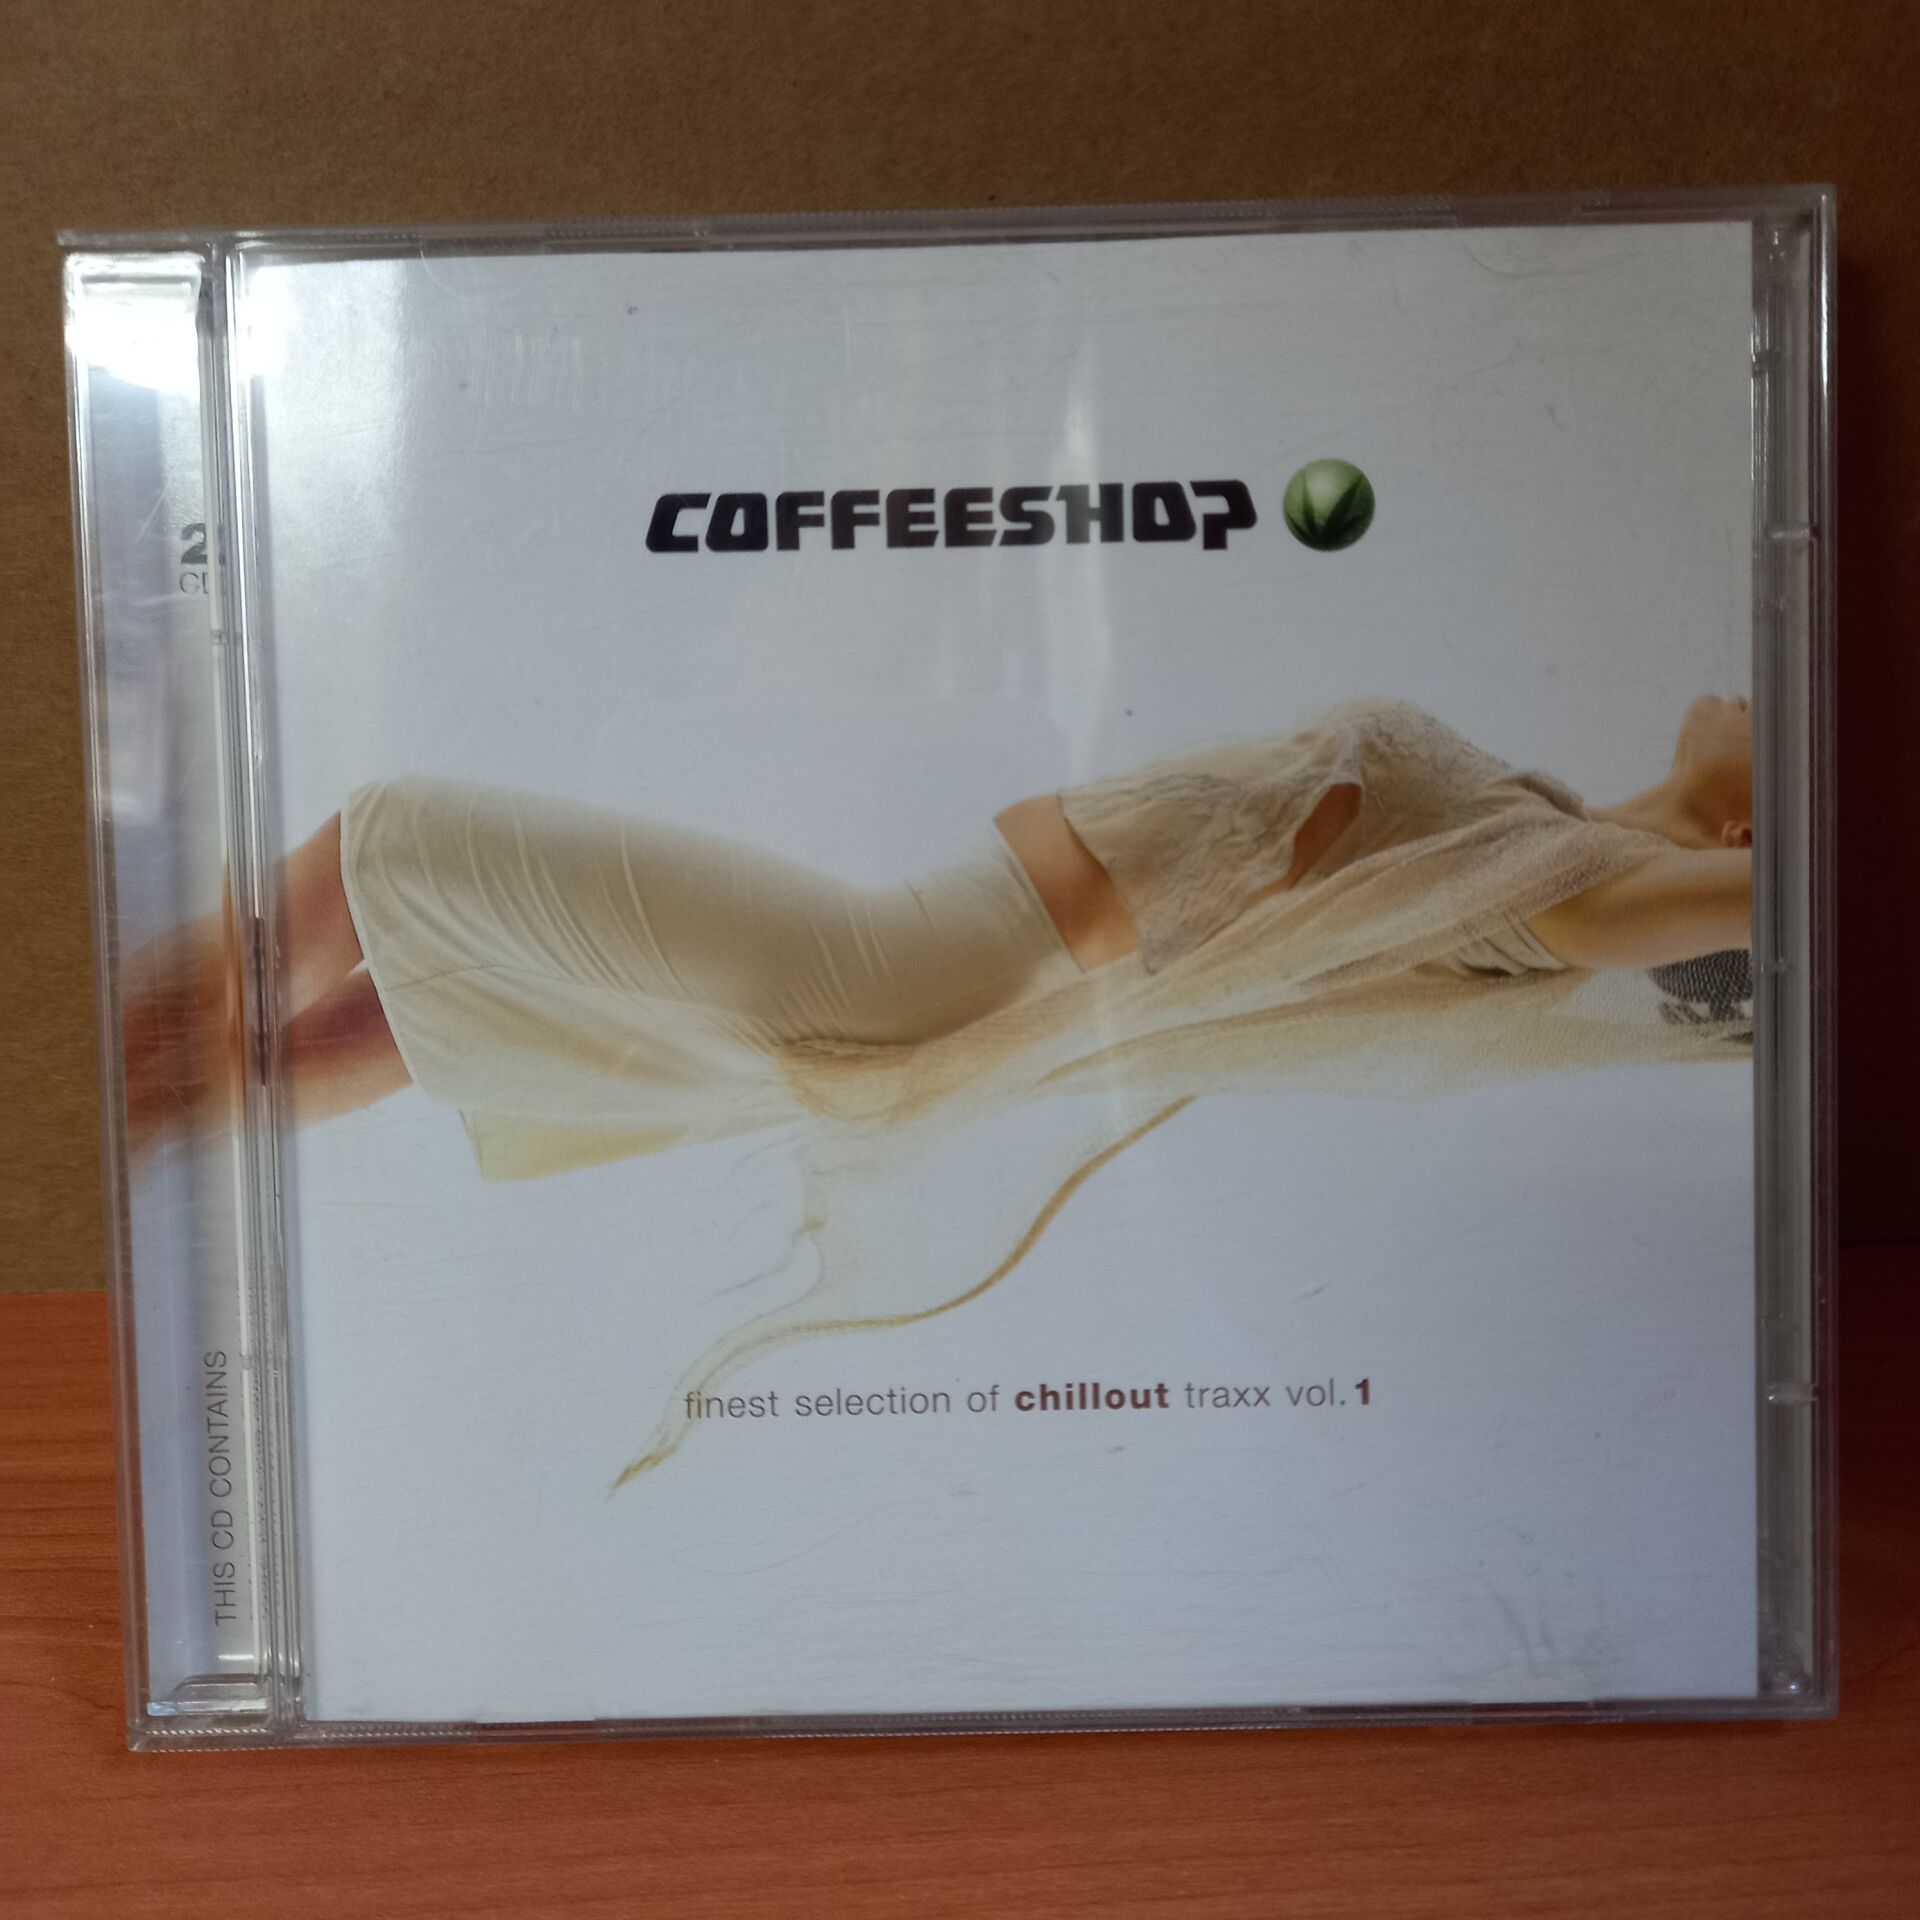 COFFEESHOP - FINEST SELECTION OF CHILLOUT TRAXX VOL.1 (2001) - 2CD 2. EL